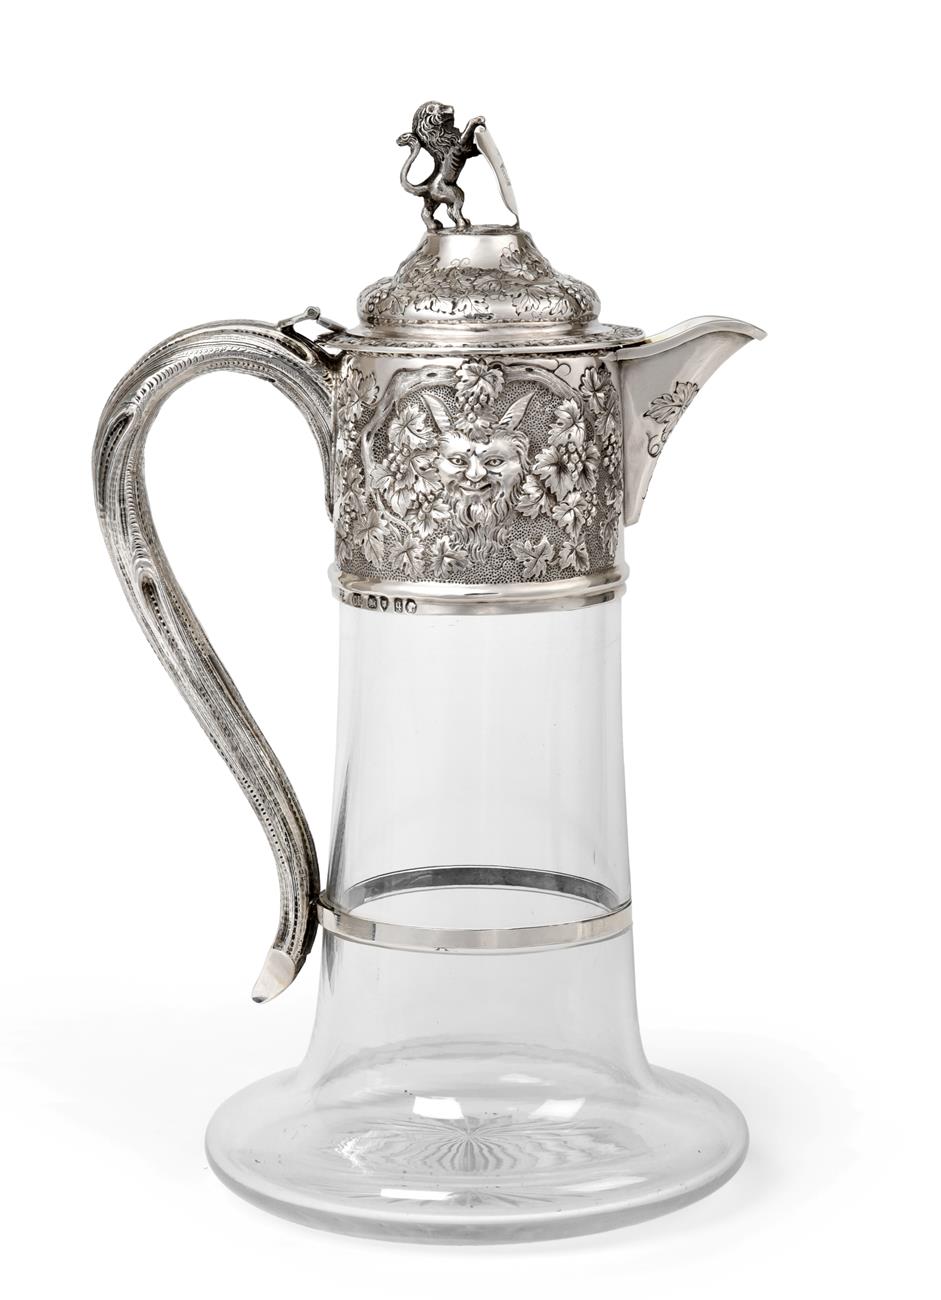 Lot 2096 - A Victorian Silver-Mounted Glass Claret-Jug, by Charles Boyton, London, 1871, the plain glass...